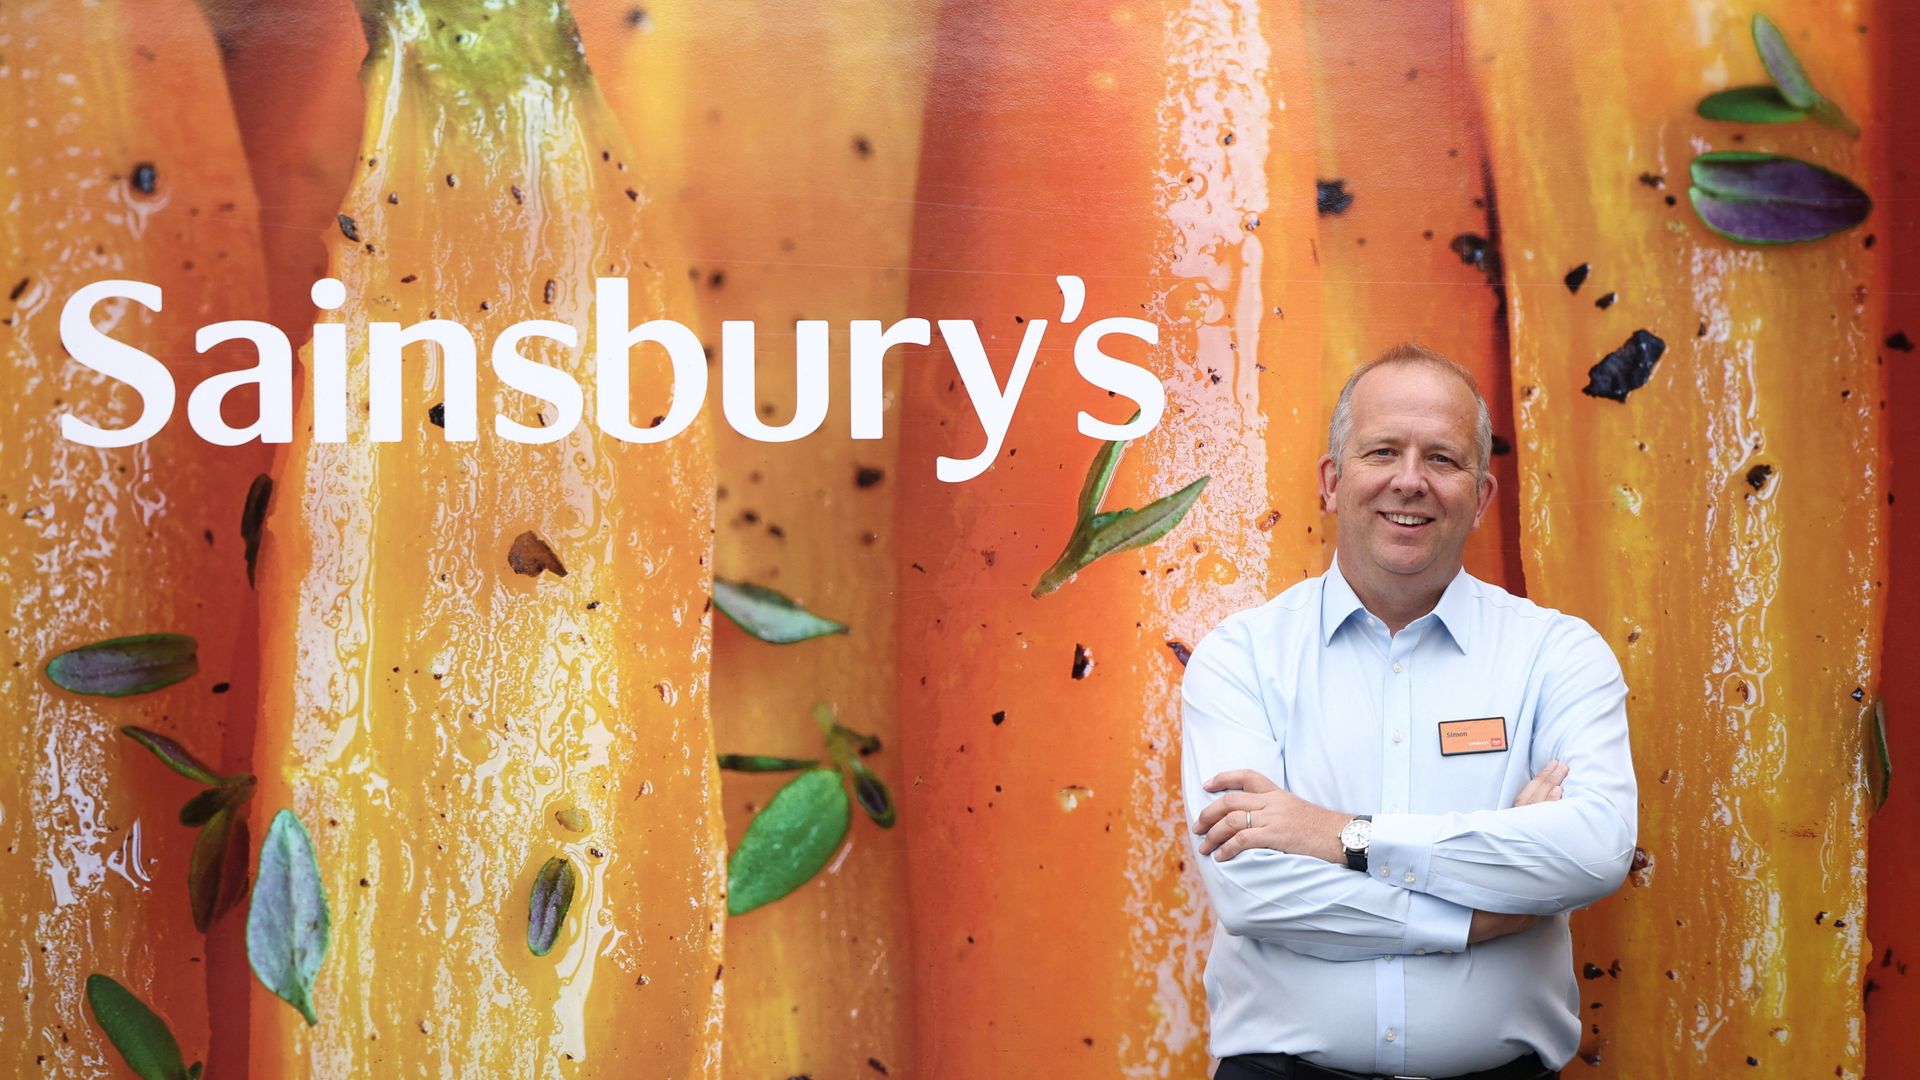 Sainsbury's 'winning over shoppers from rivals' as profits rise